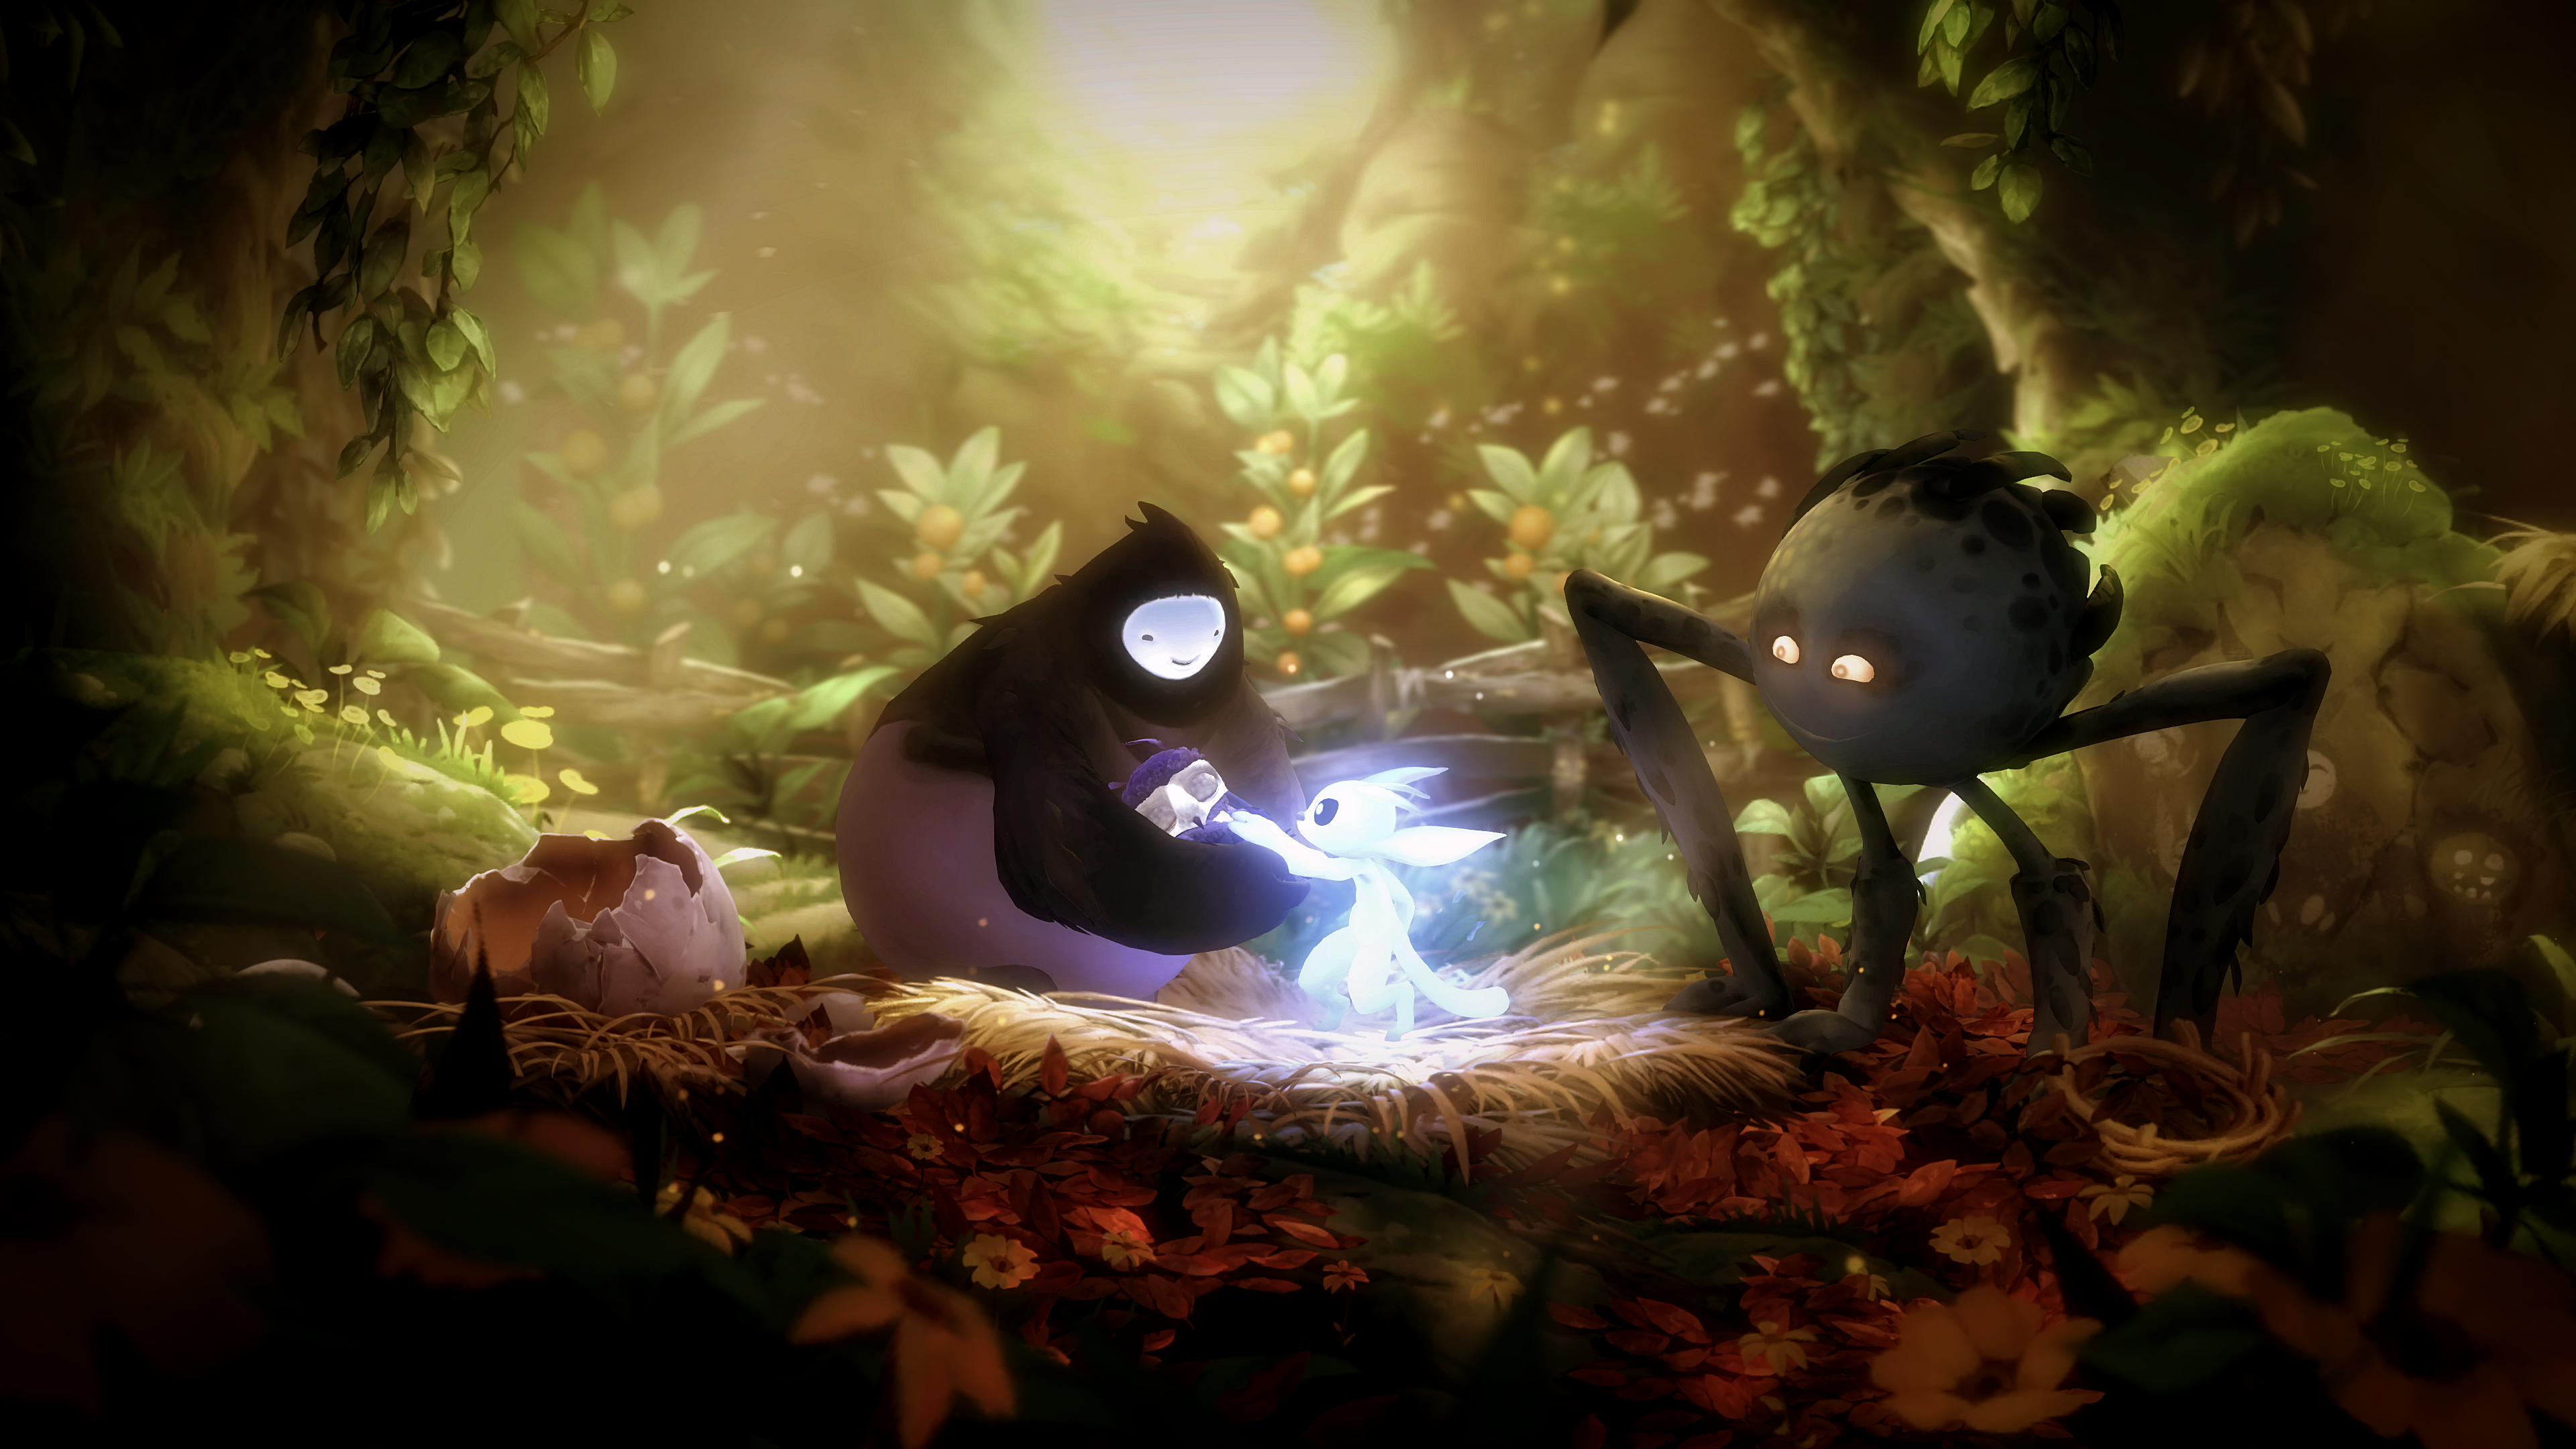 Coming Soon to Xbox Game Pass for PC: Ori and The Will of the